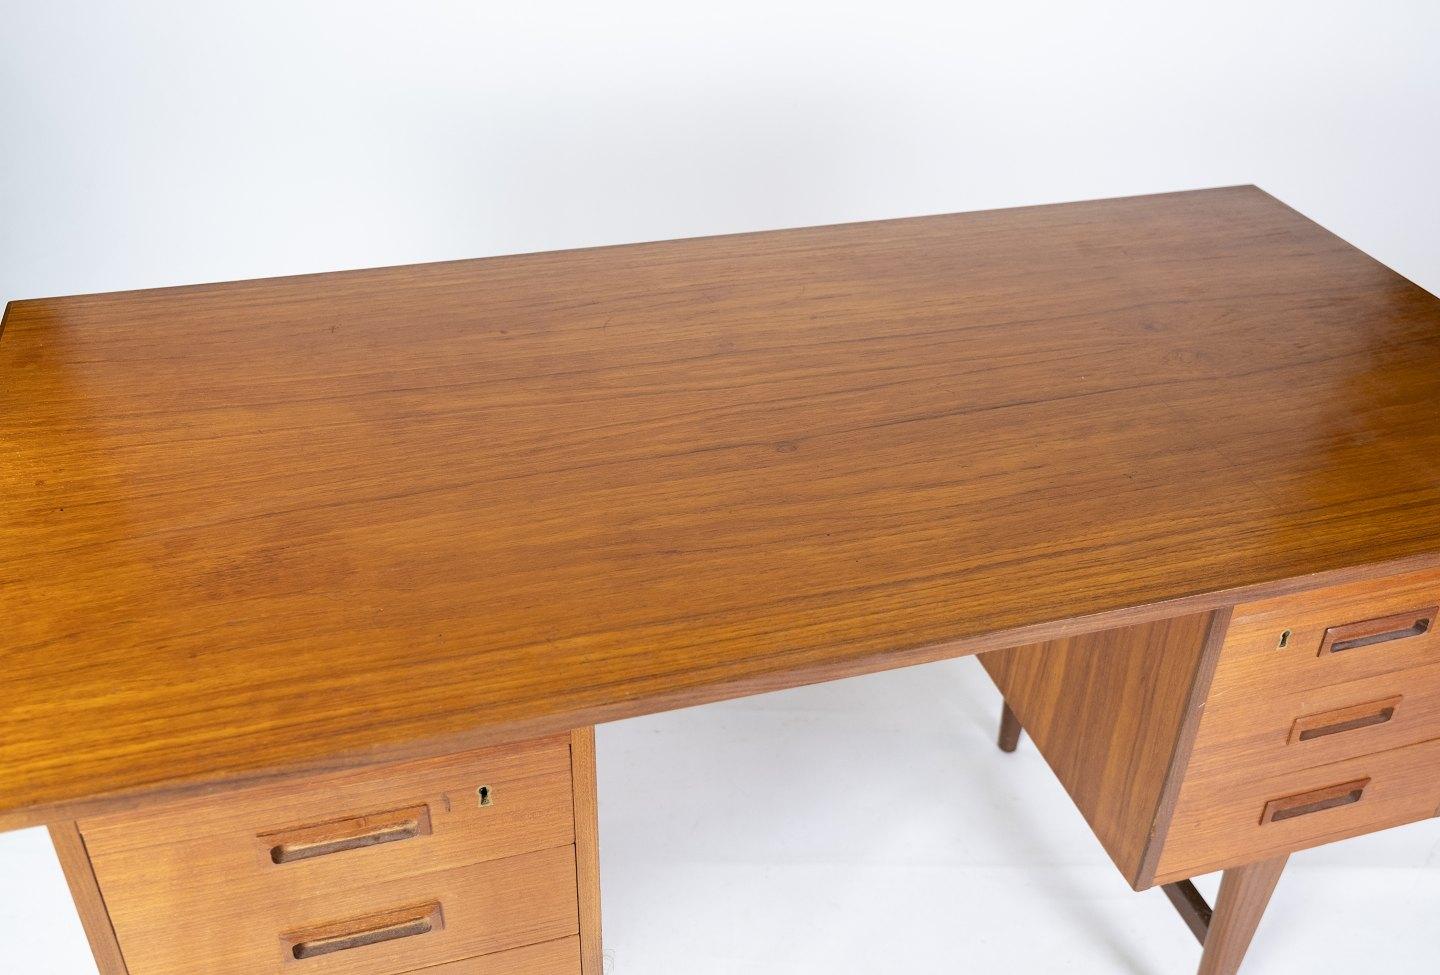 Desk Made In Teak, Danish Design From 1960s In Good Condition For Sale In Lejre, DK